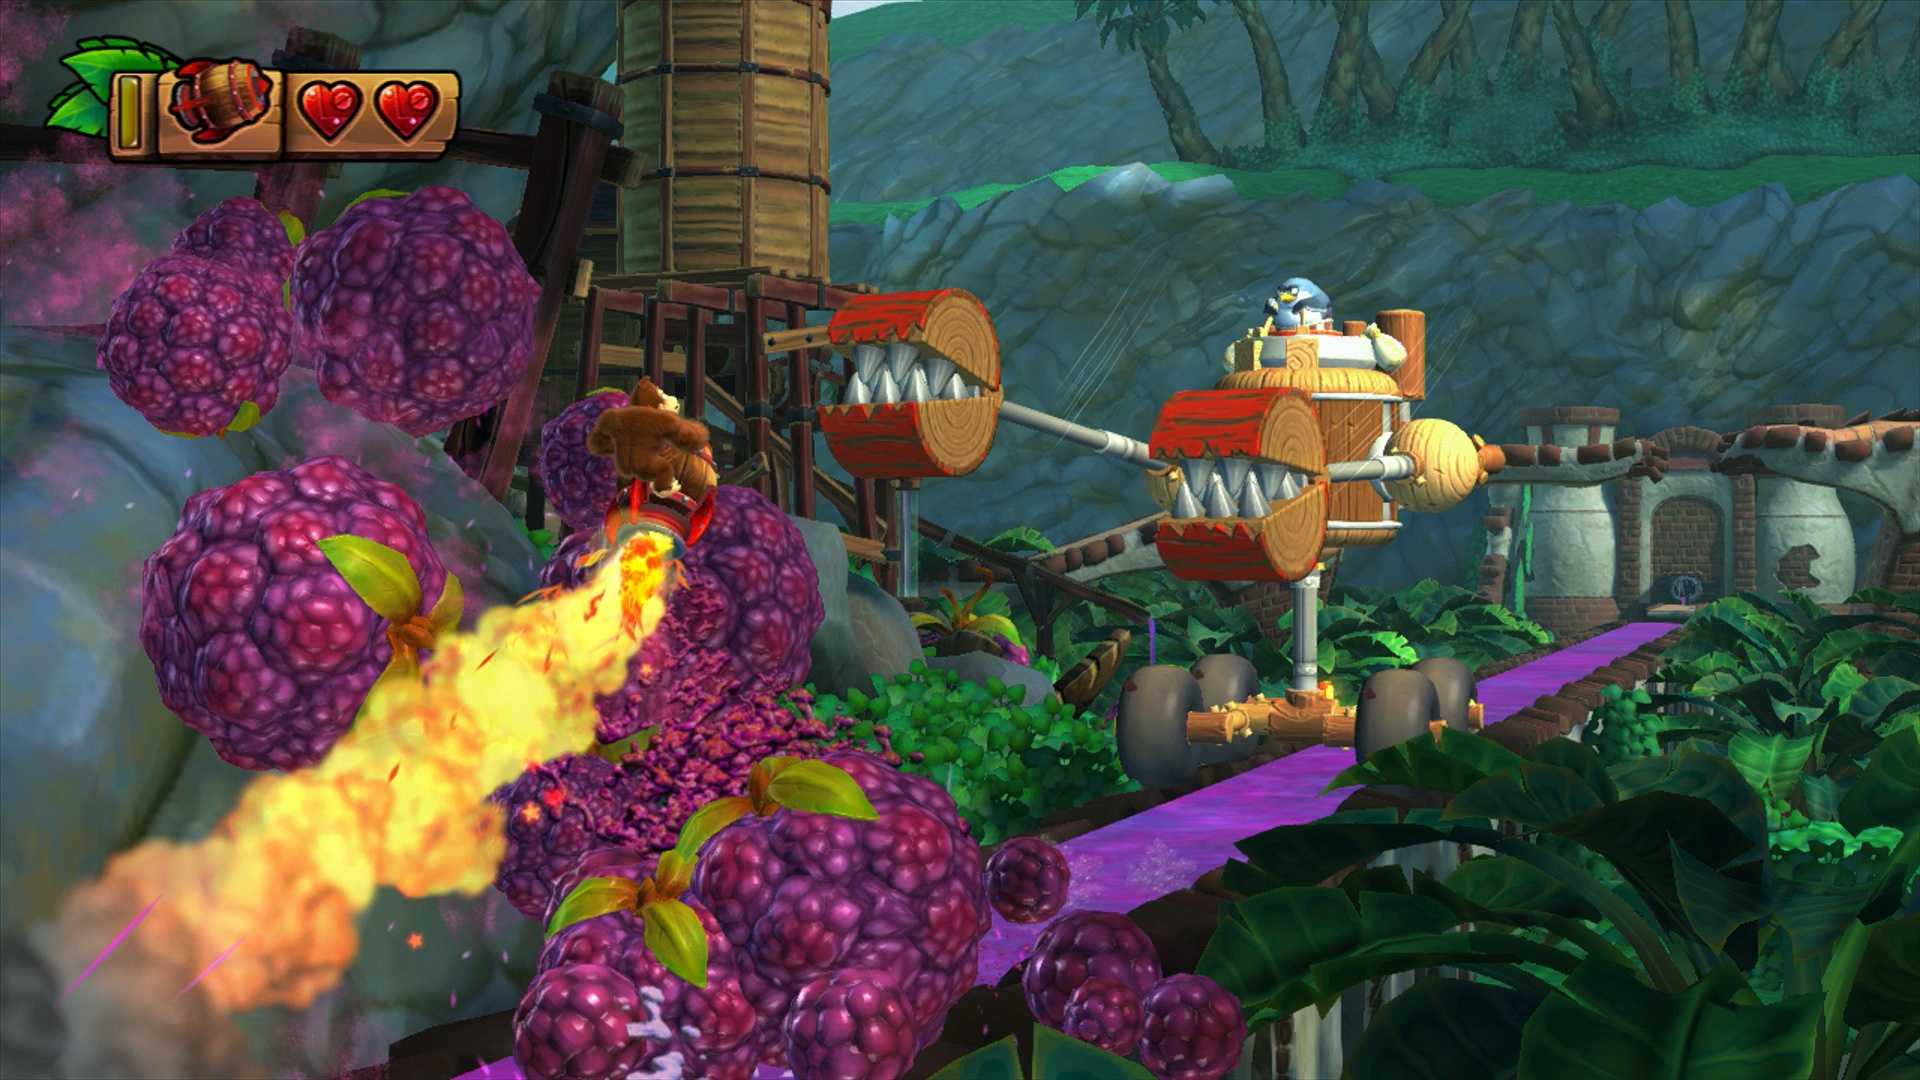 Donkey kong country tropical. Игра Donkey Kong Country: Tropical Freeze. Donkey Kong Country Скриншоты. Donkey Kong Country Tropical Freeze all Bosses. Donkey Kong Tropical Freeze боссы.